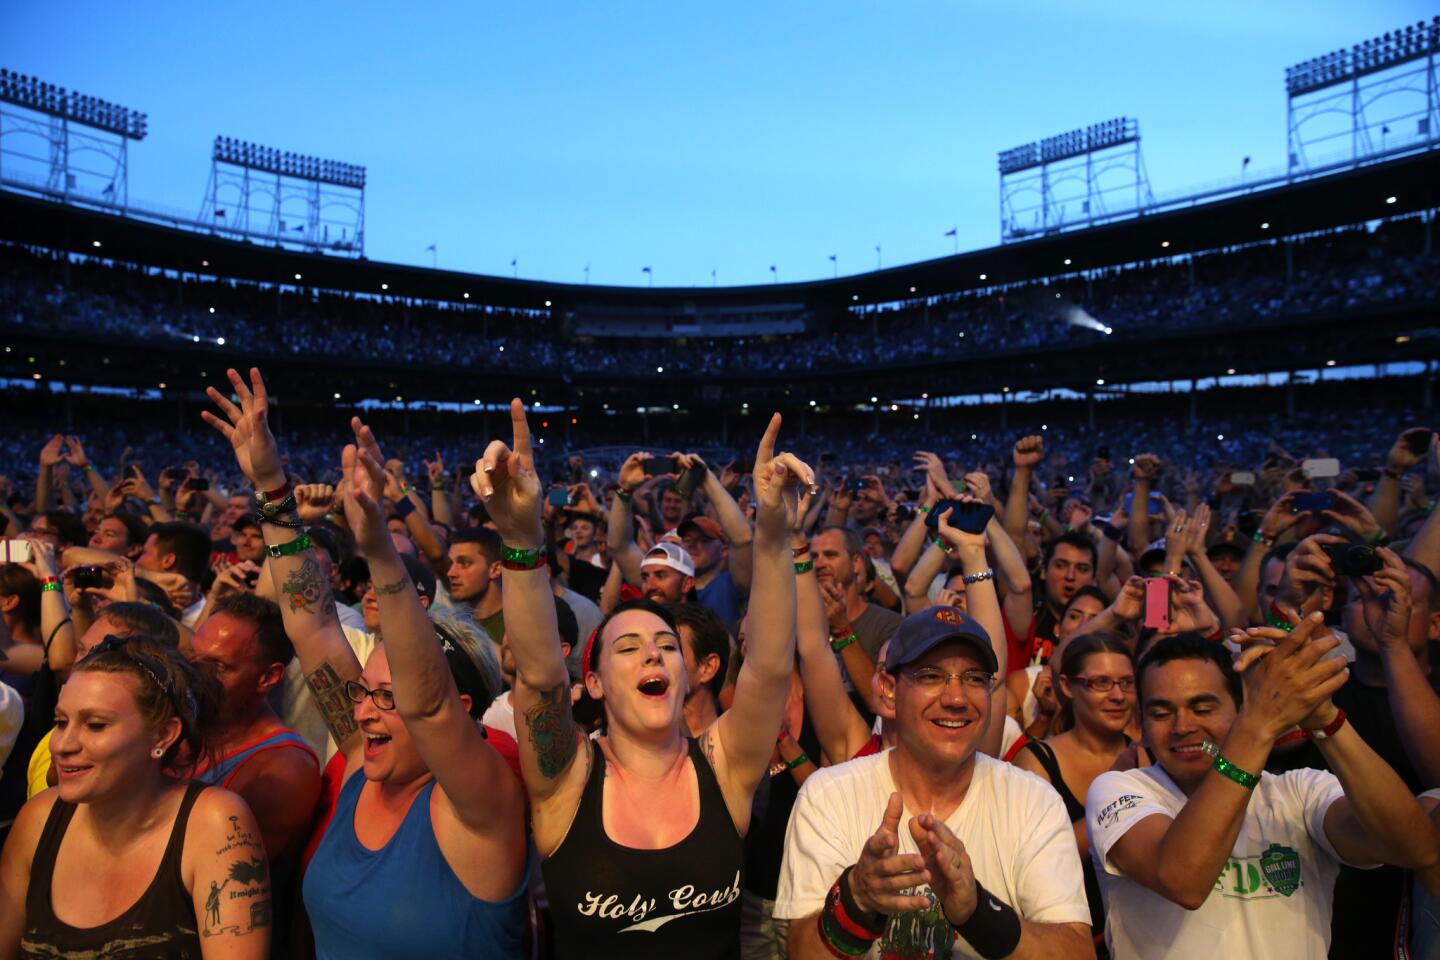 chi-pearl-jam-at-wrigley-field-20130719-020